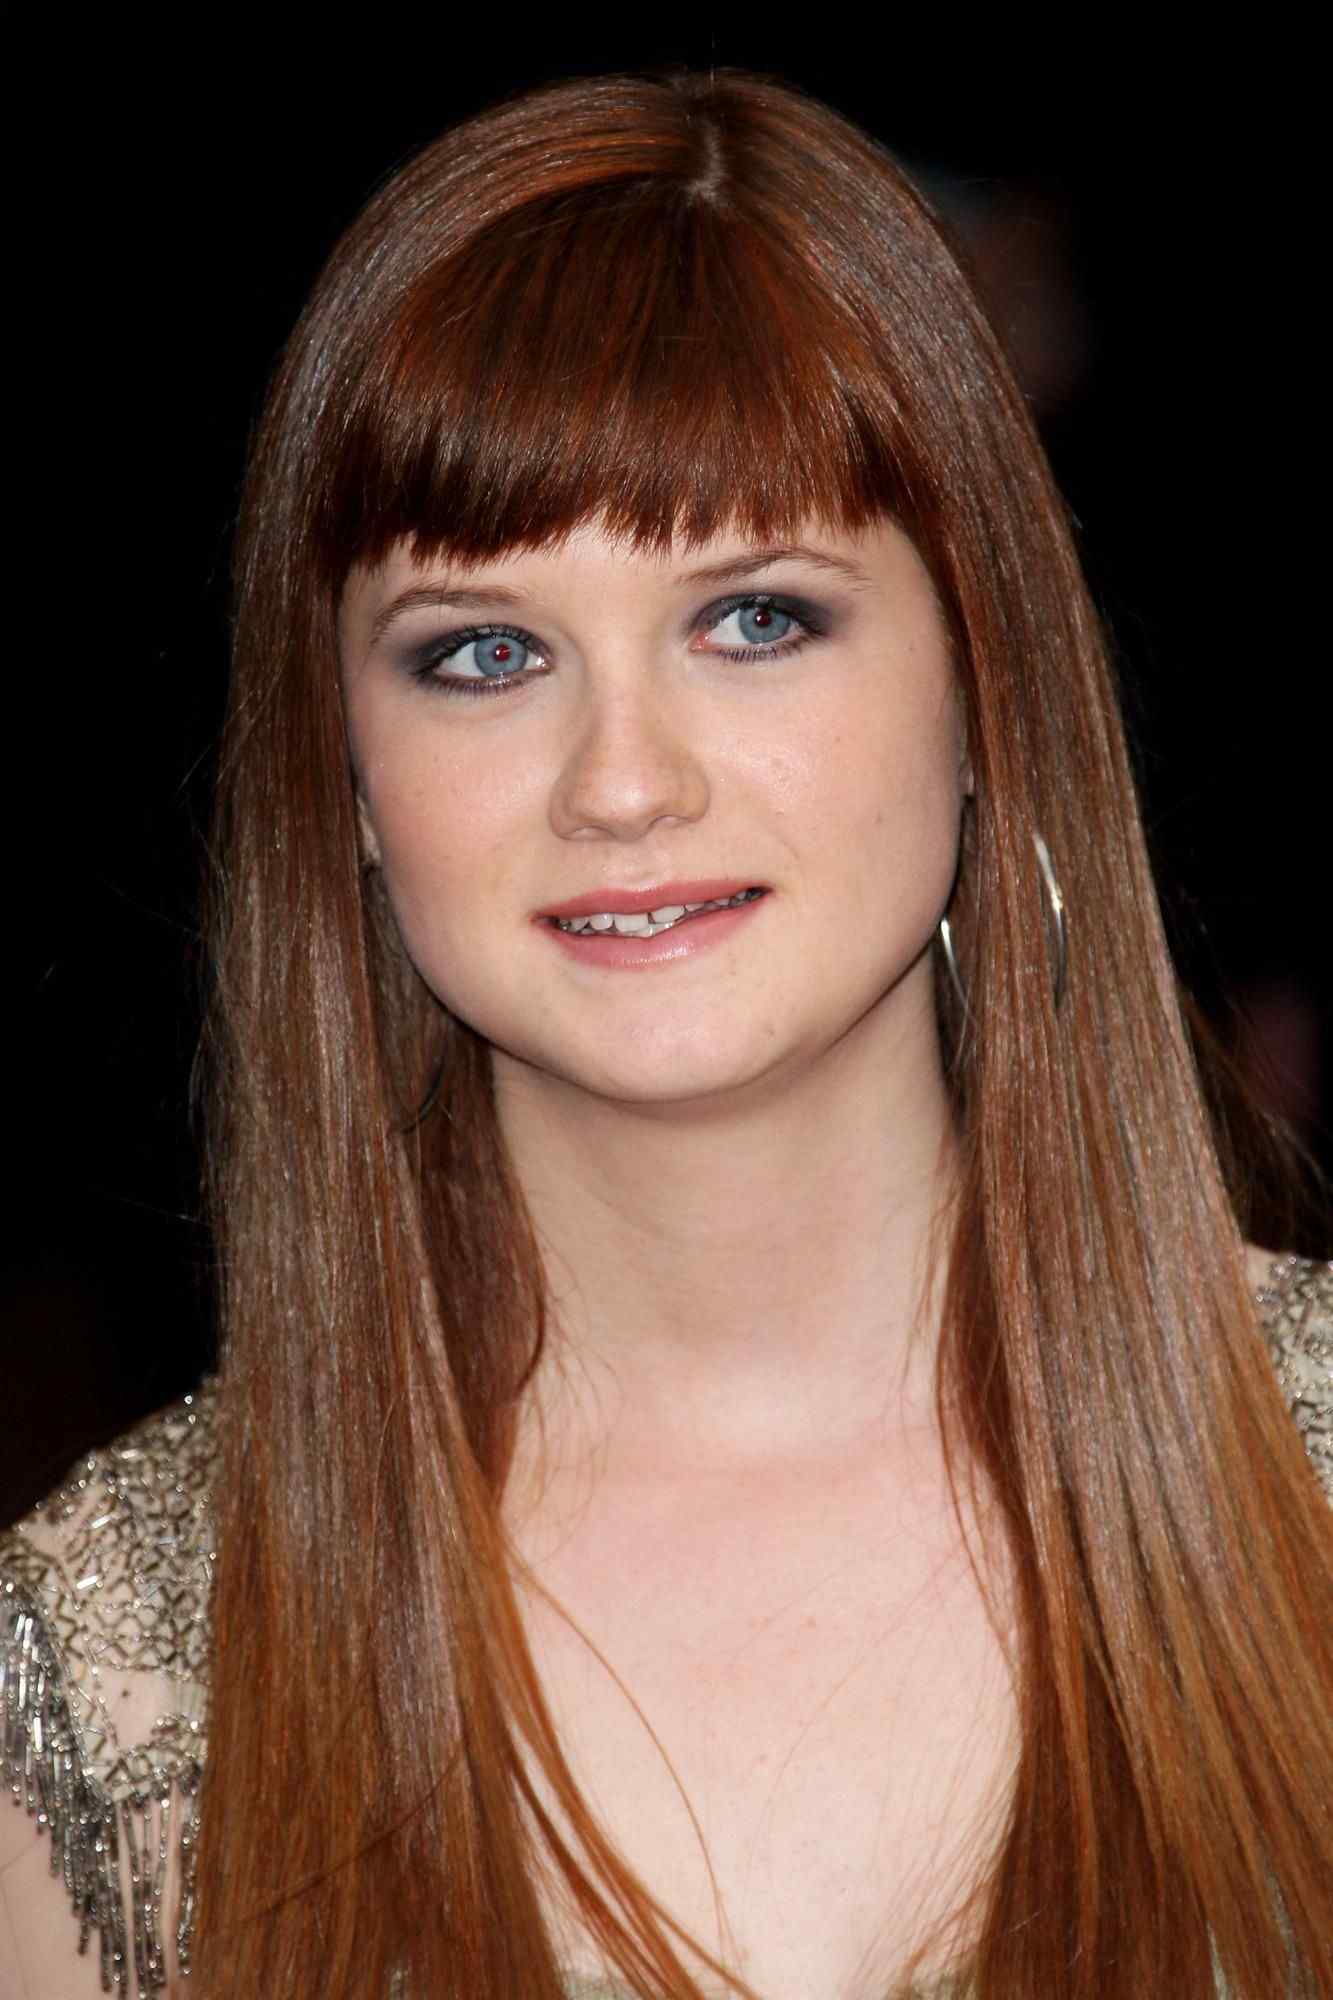 60+ Sexy Bonnie Wright Boobs Pictures Are Going To Make You Want Her Badly 423